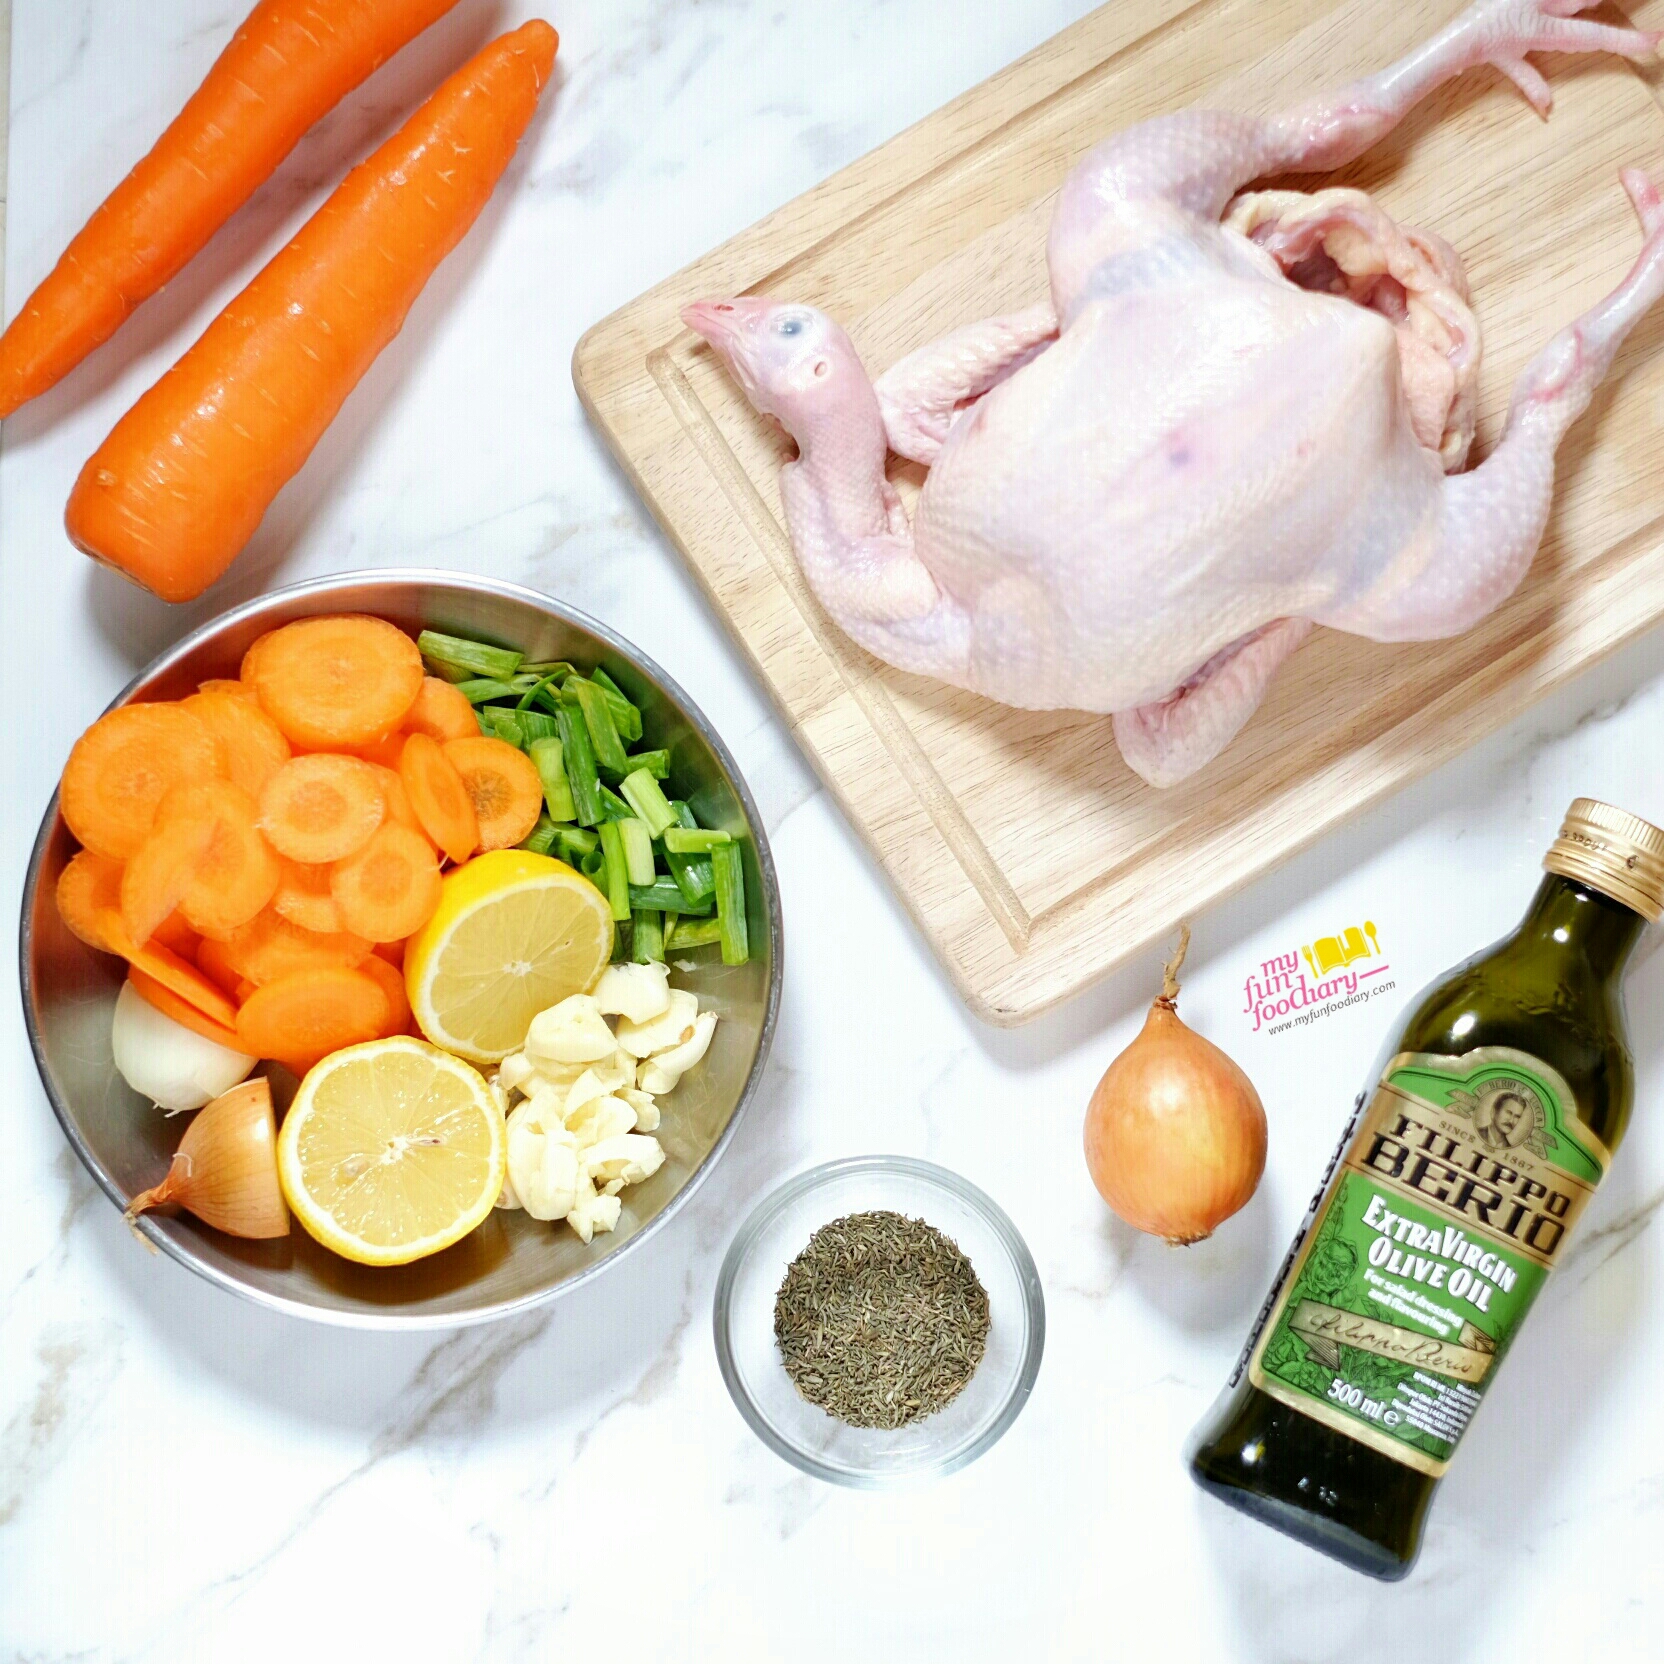 Ingredients for the Roasted Chicken by Myfunfoodiary